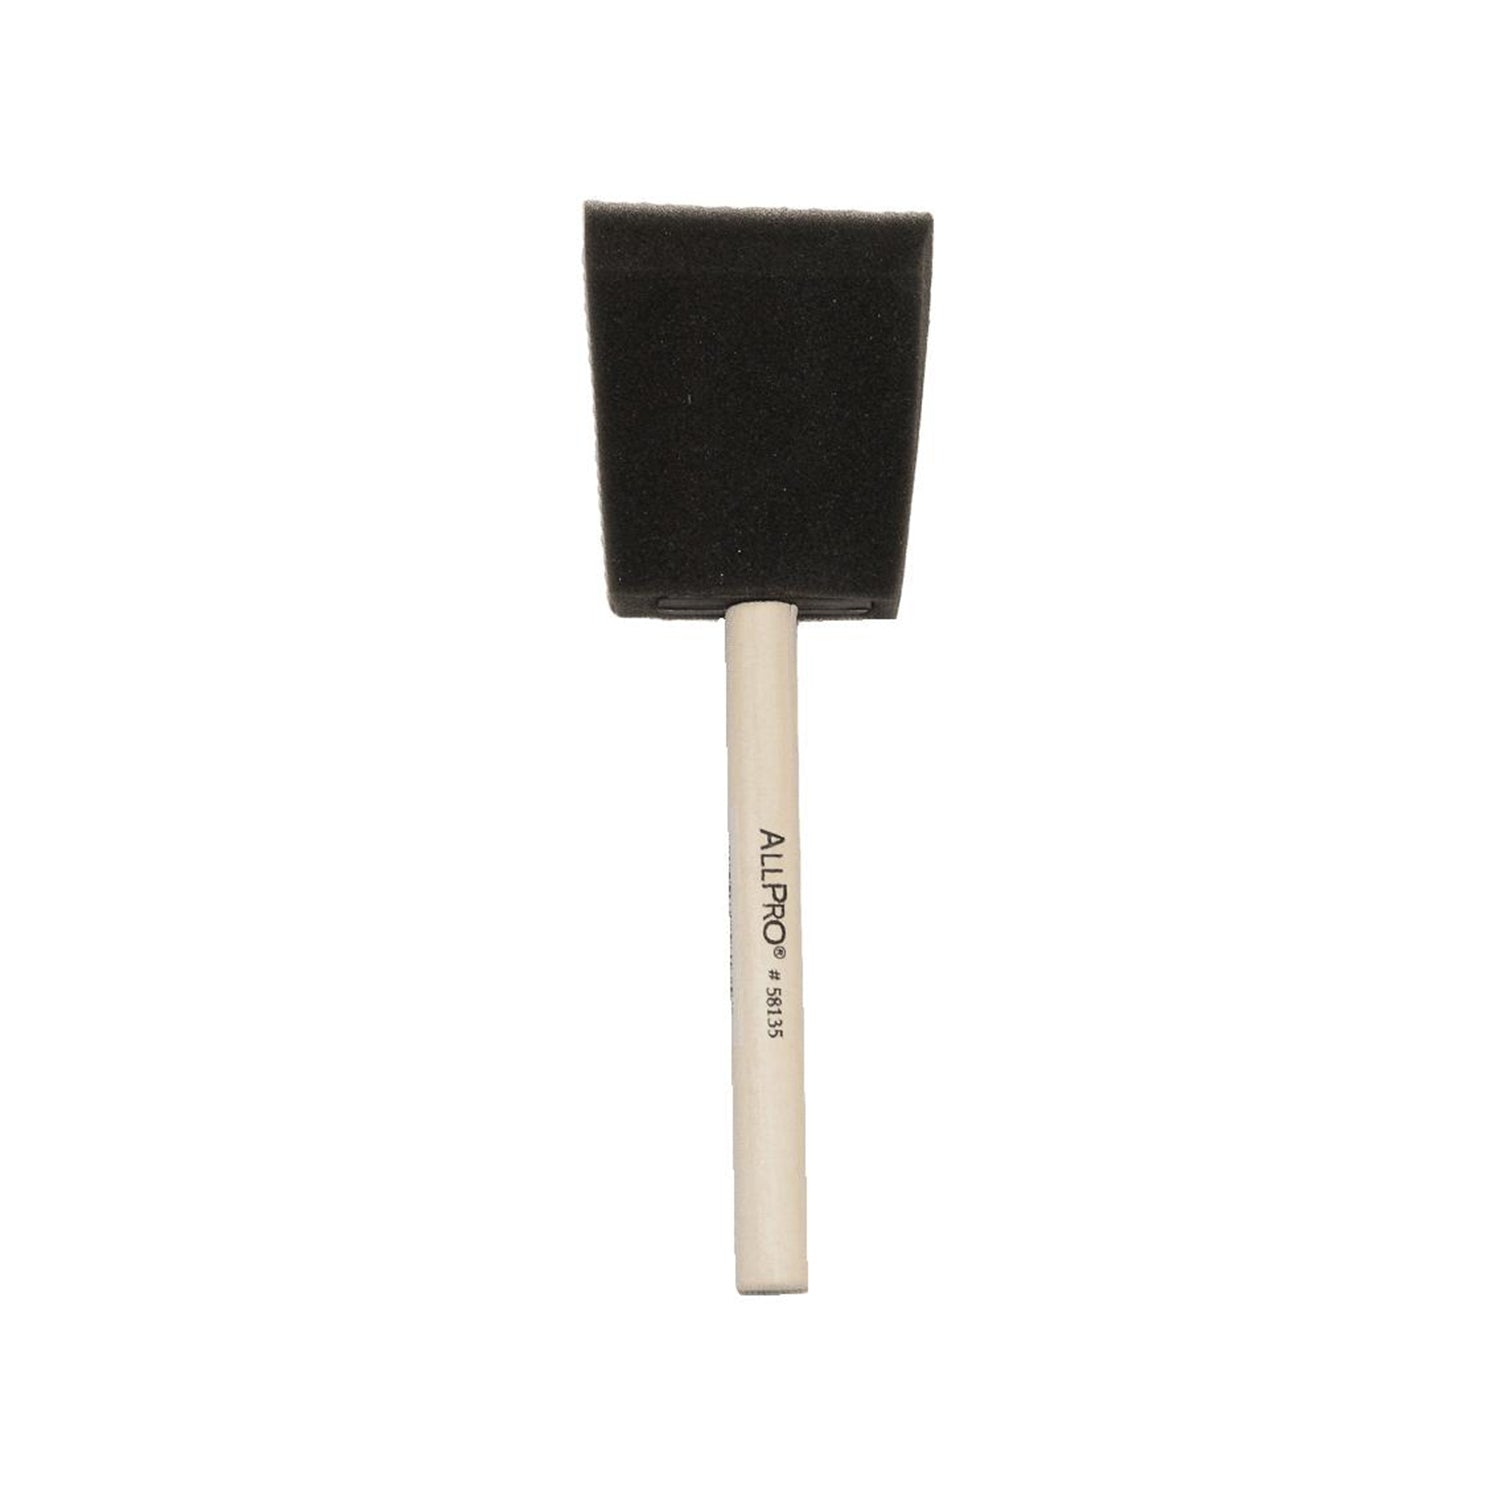 Allpro high density foam brushes, available at Clement's Paint in Austin, TX. 